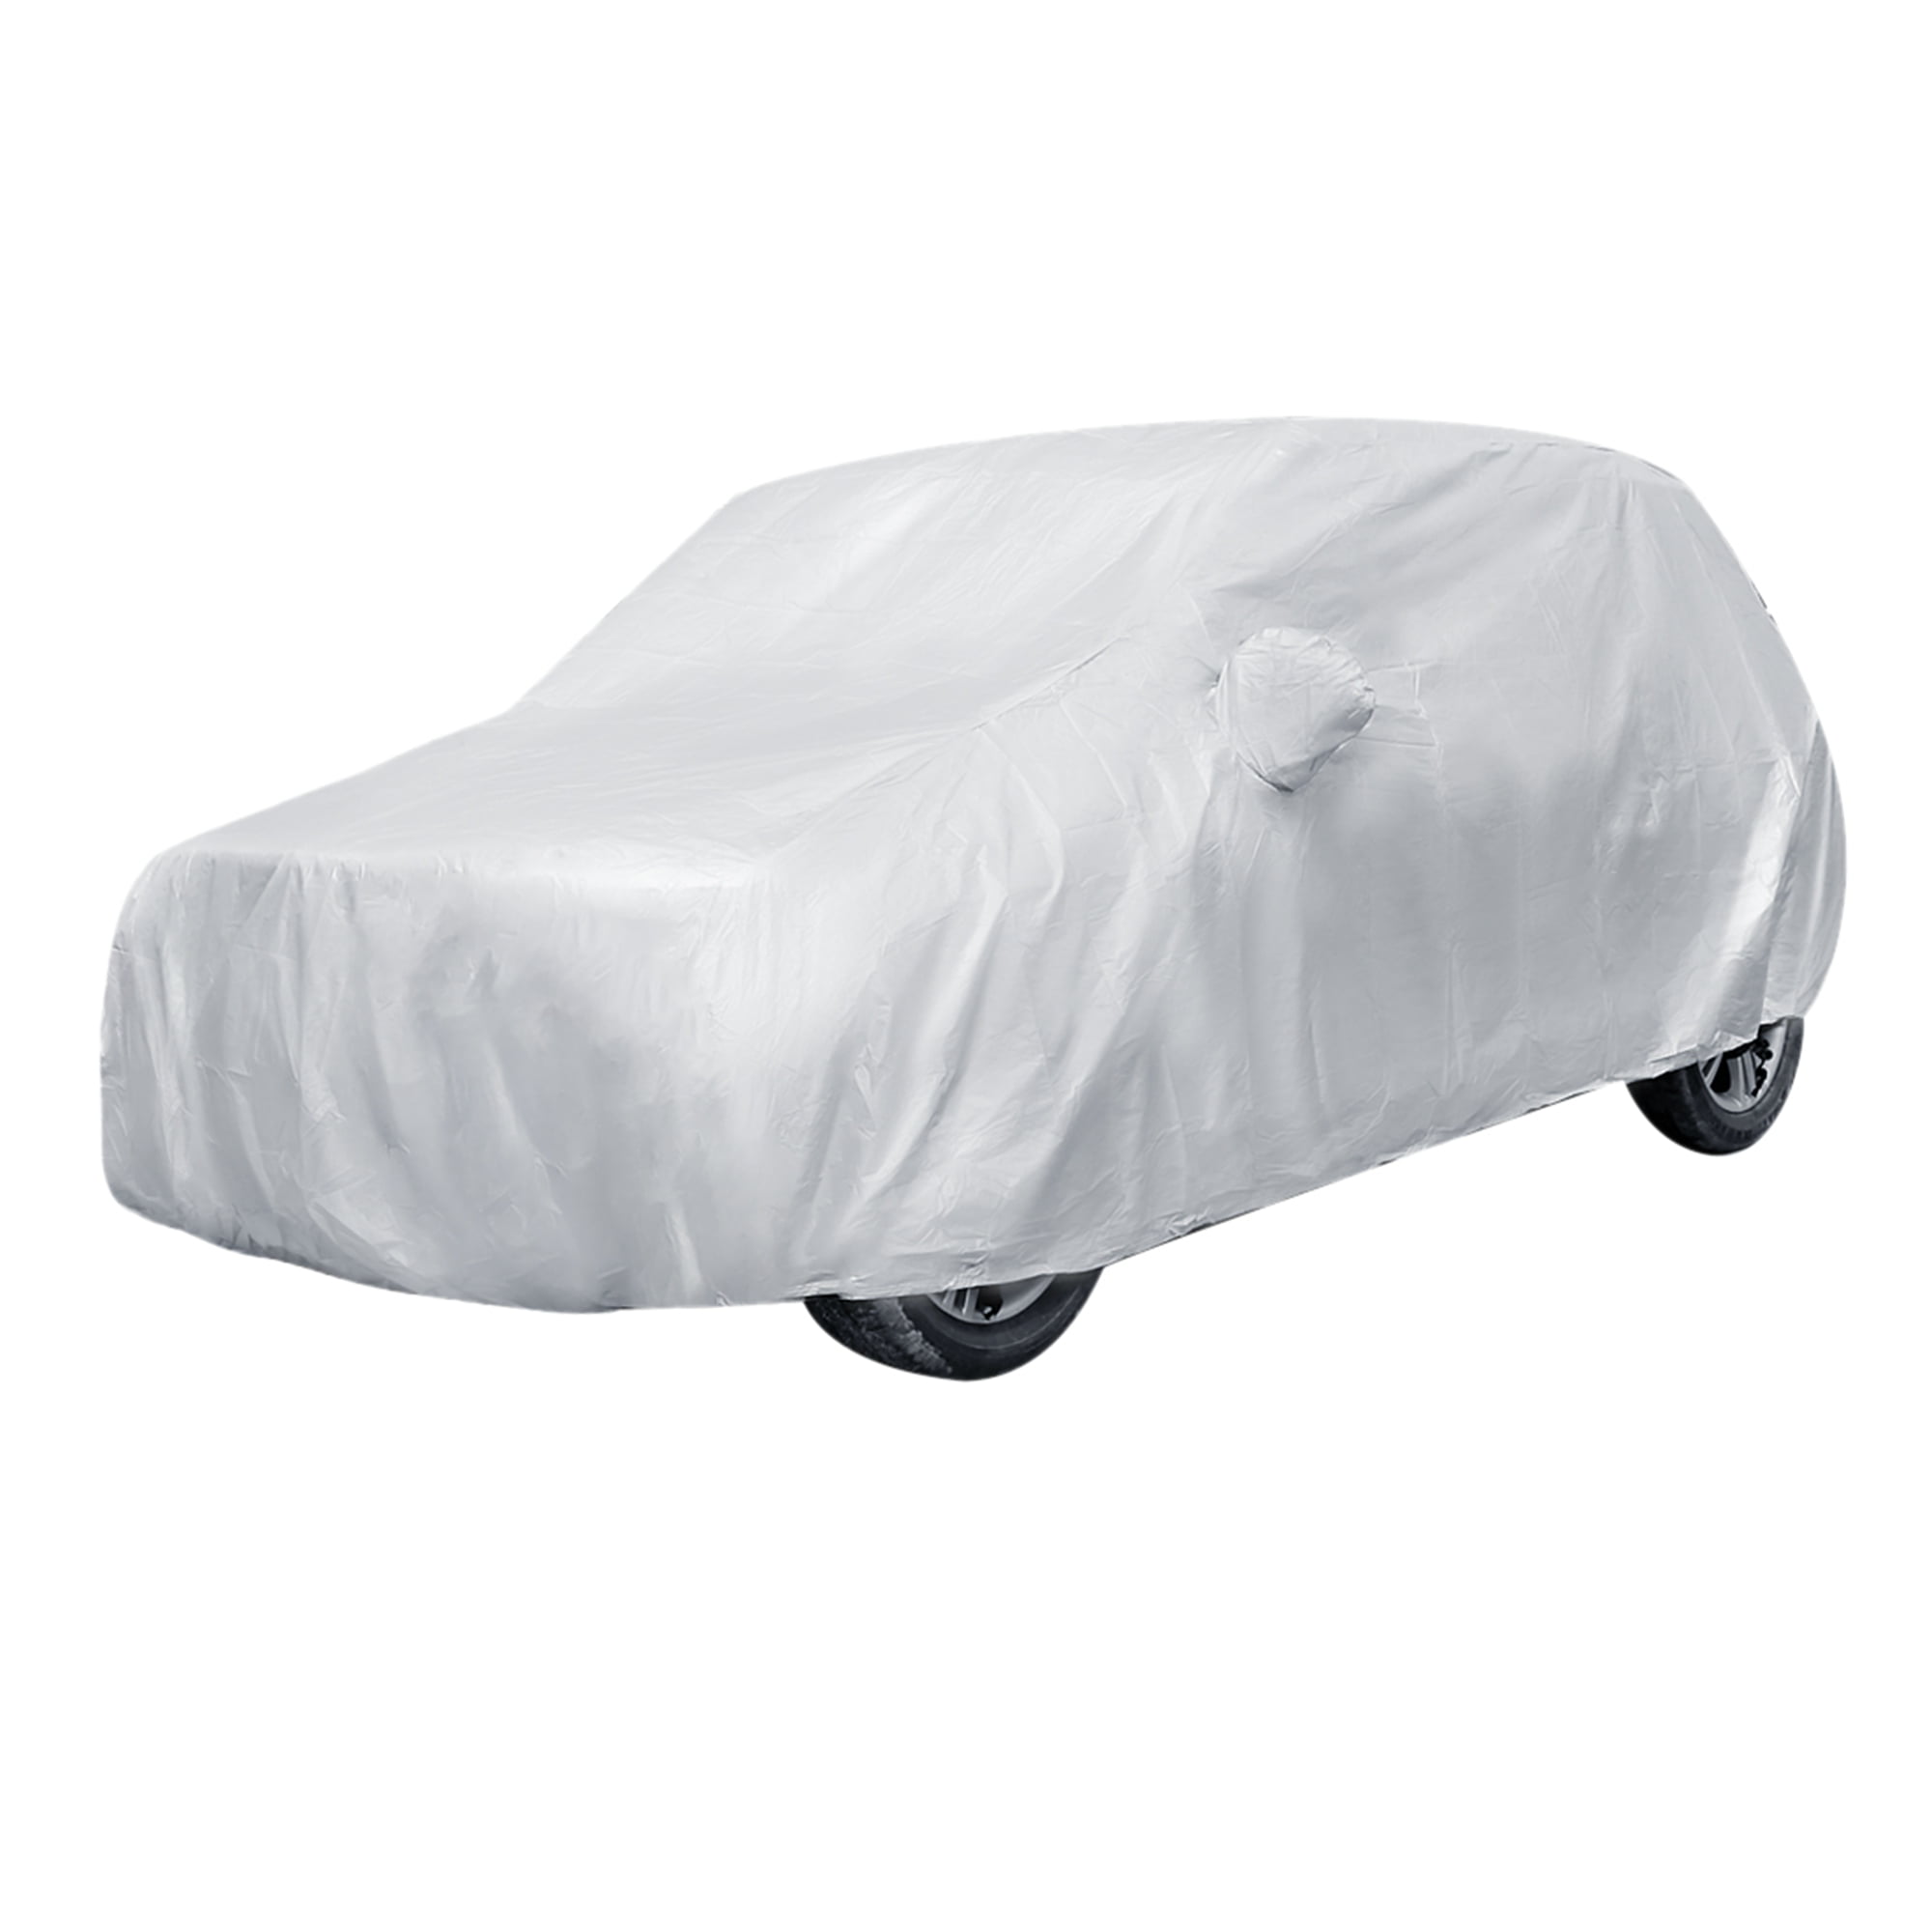 Walser AllWeather Car Cover, Full Car Cover, Half Cover, Waterproof, Car  Garage, Dustproof with UV Protection : : Automotive